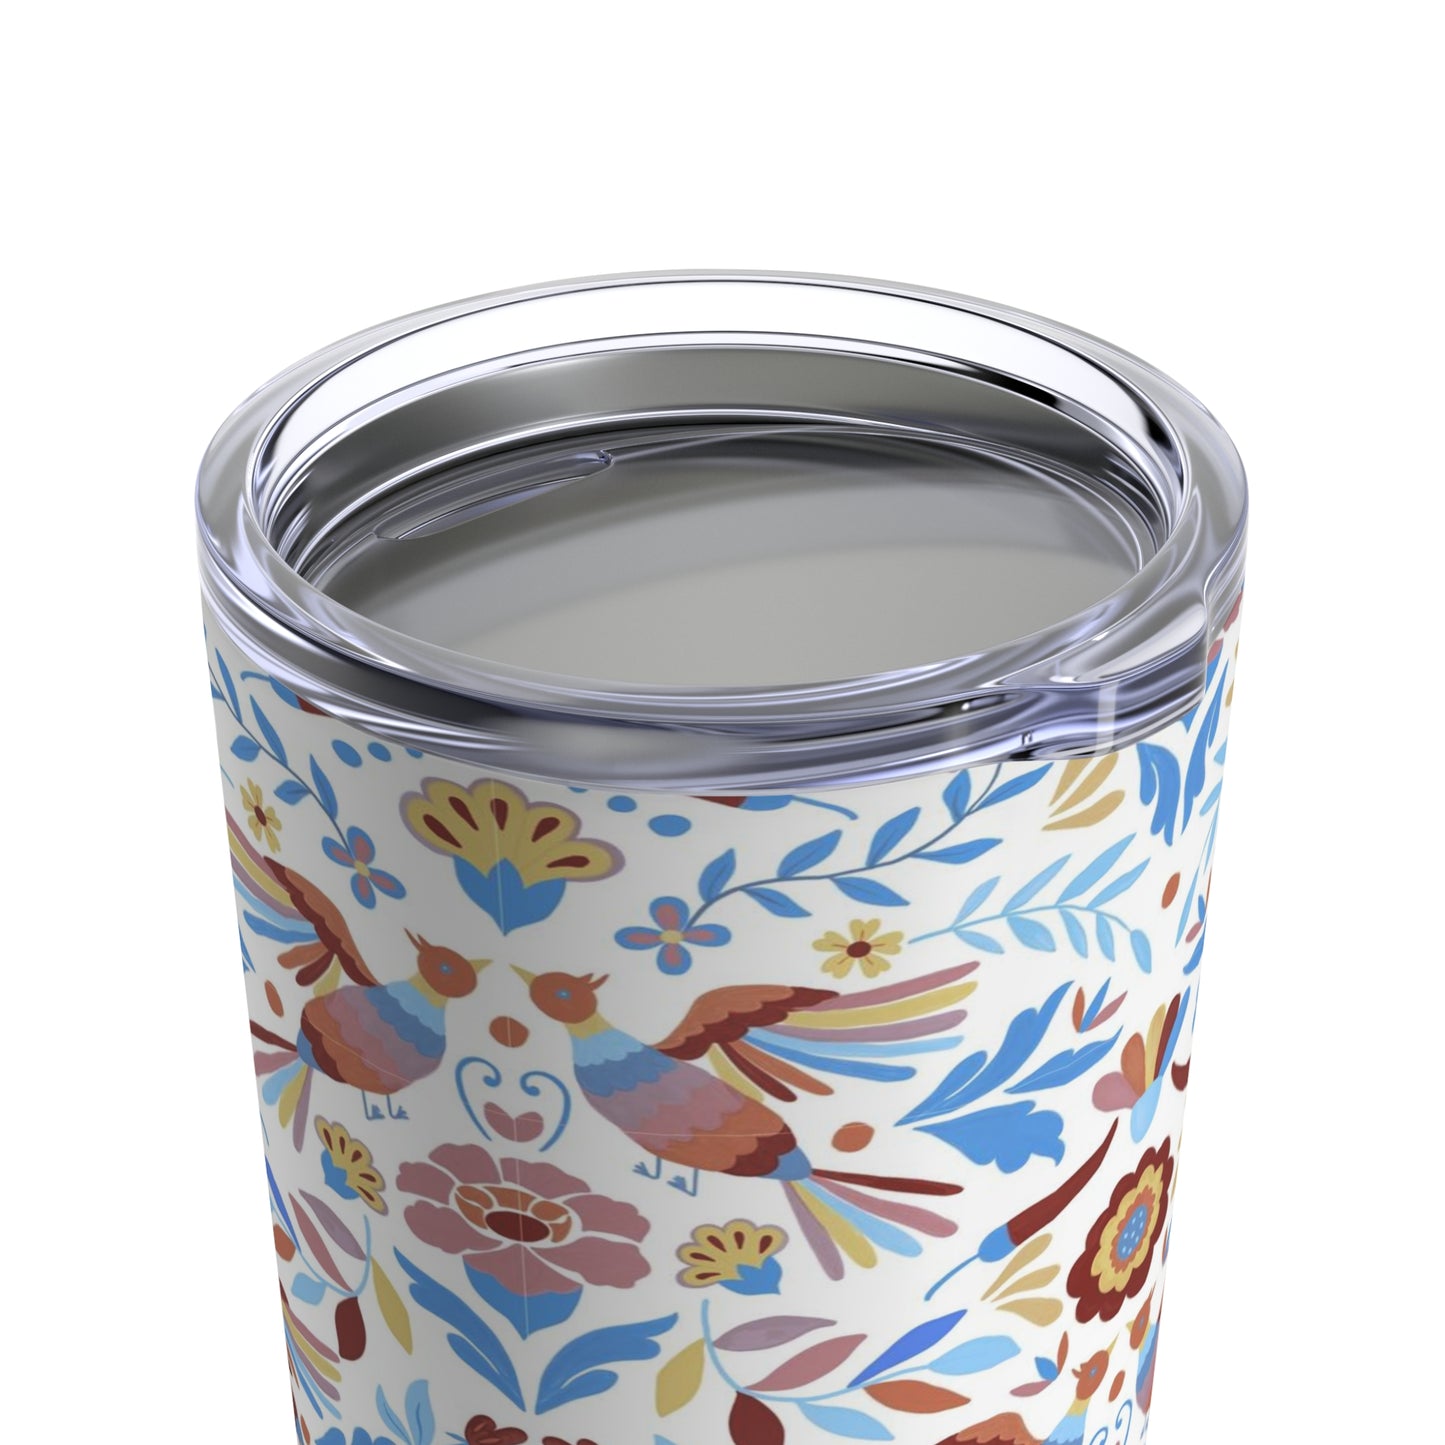 Mexican folk Tumbler for her. 20oz tumbler with Mexican art. Birthday gift for friend, family or teachers. Otomi tumbler